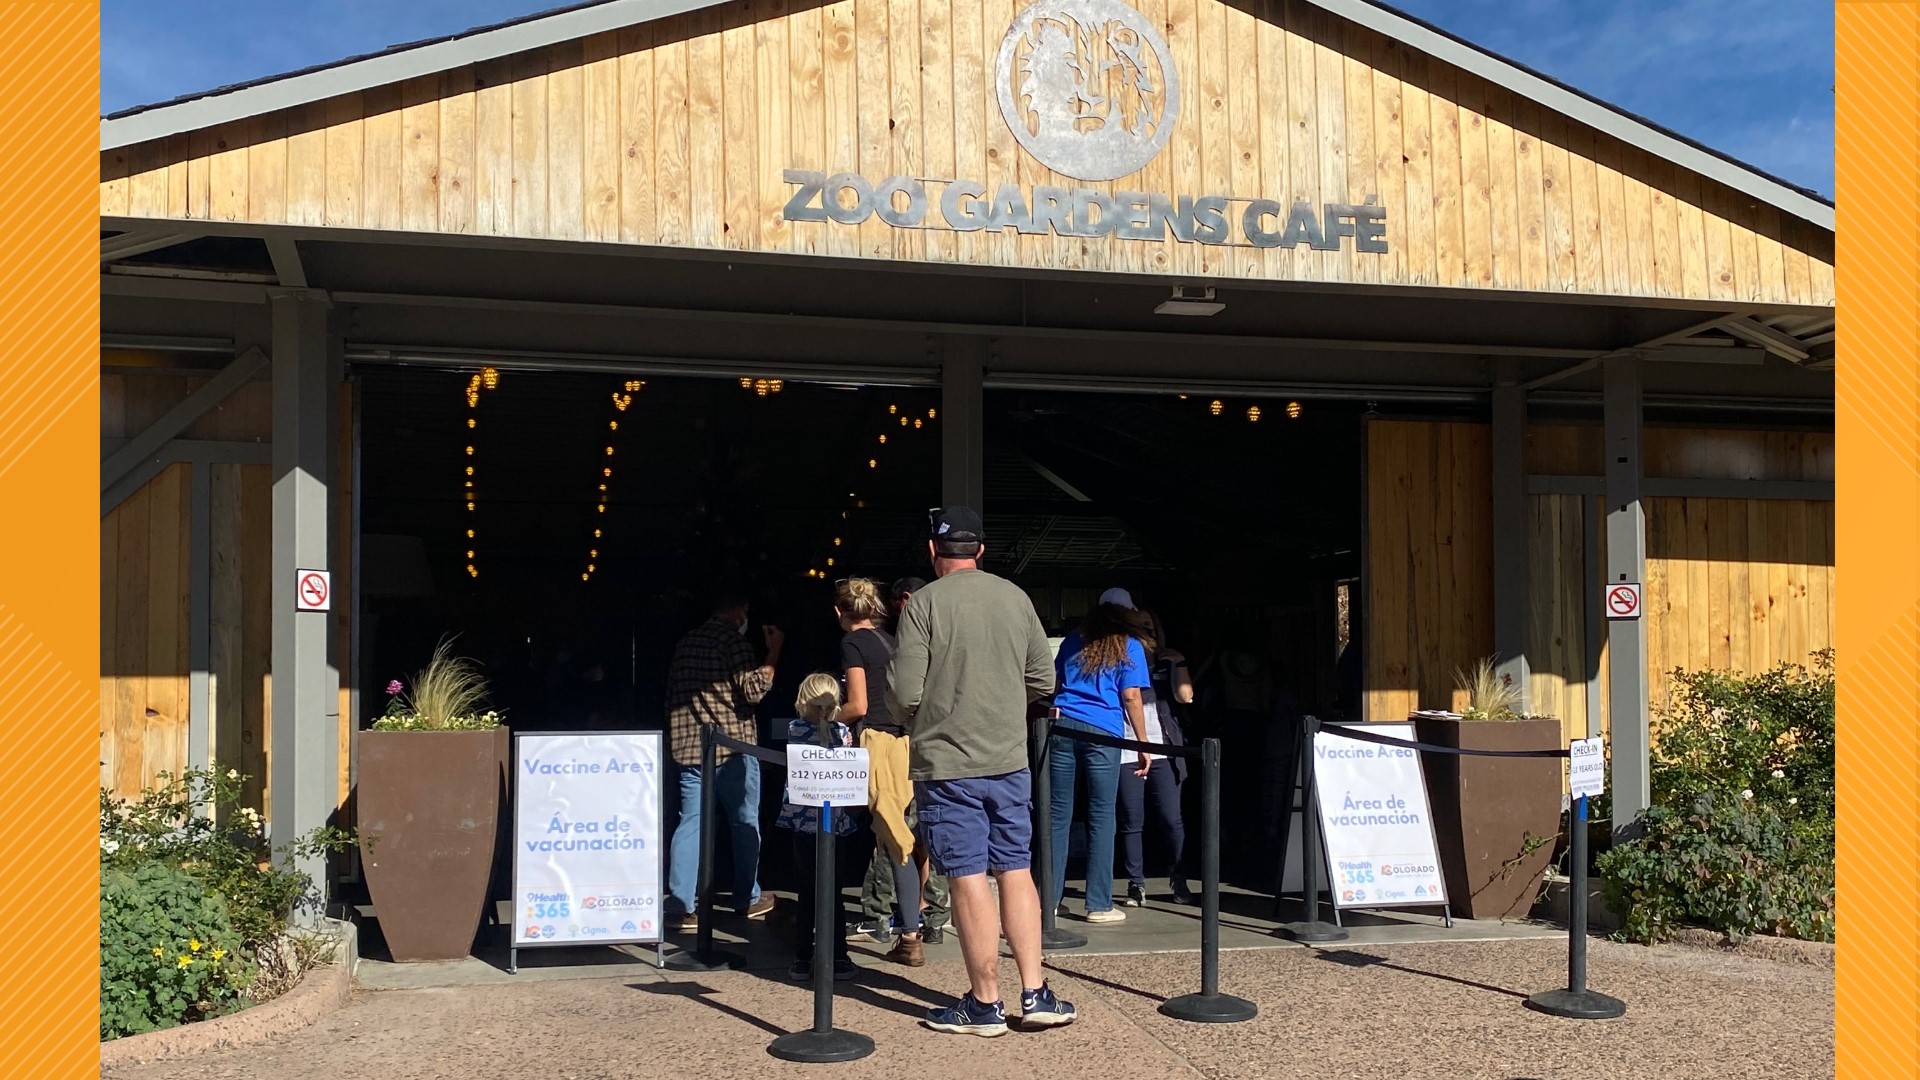 A vaccine clinic was held at the Denver Zoo for Coloradans ages 5 to 11 who are now eligible for Pfizer's COVID-19 vaccine.